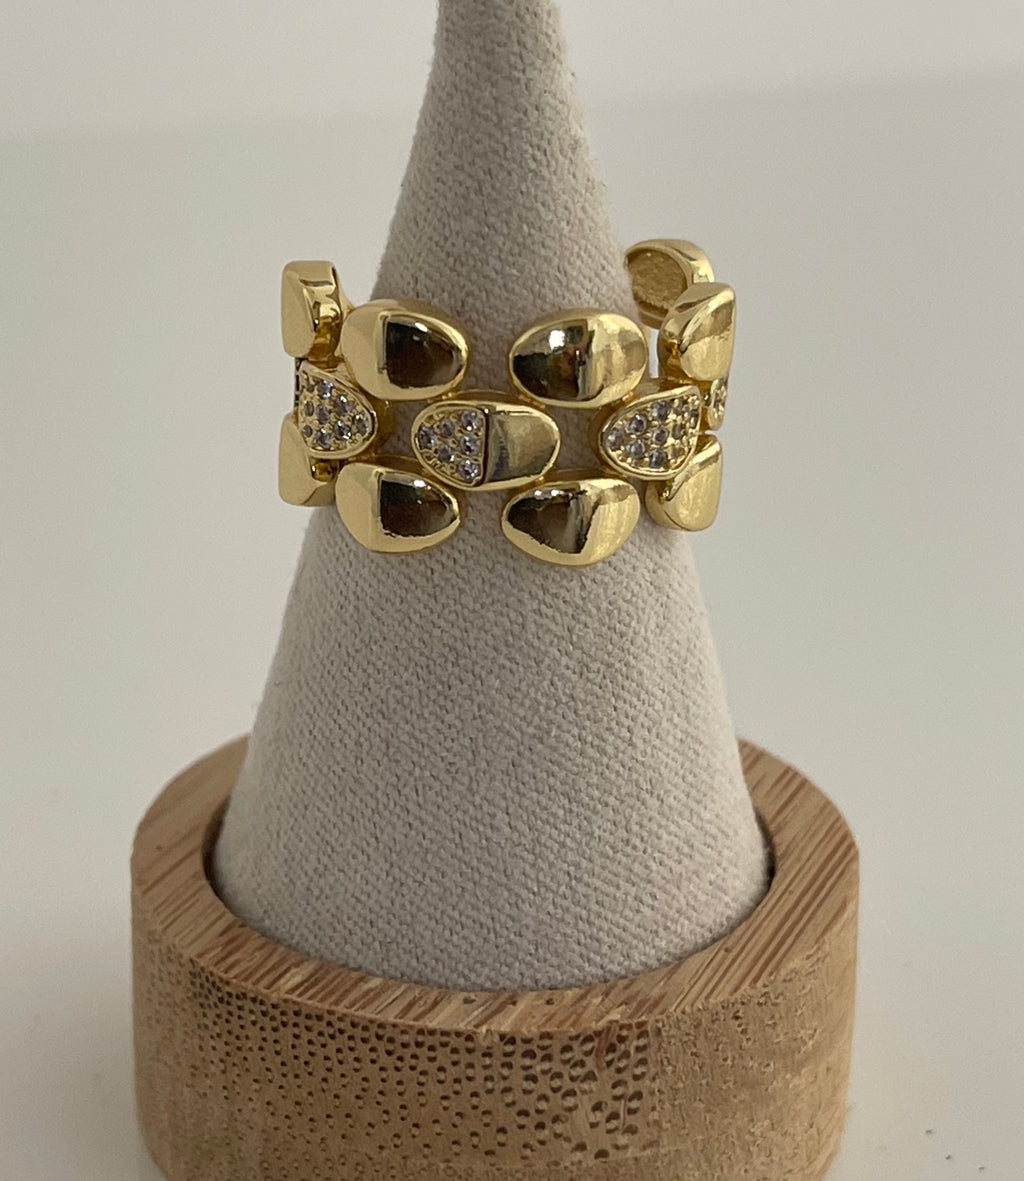 Adjustable gold filled and zircons ring